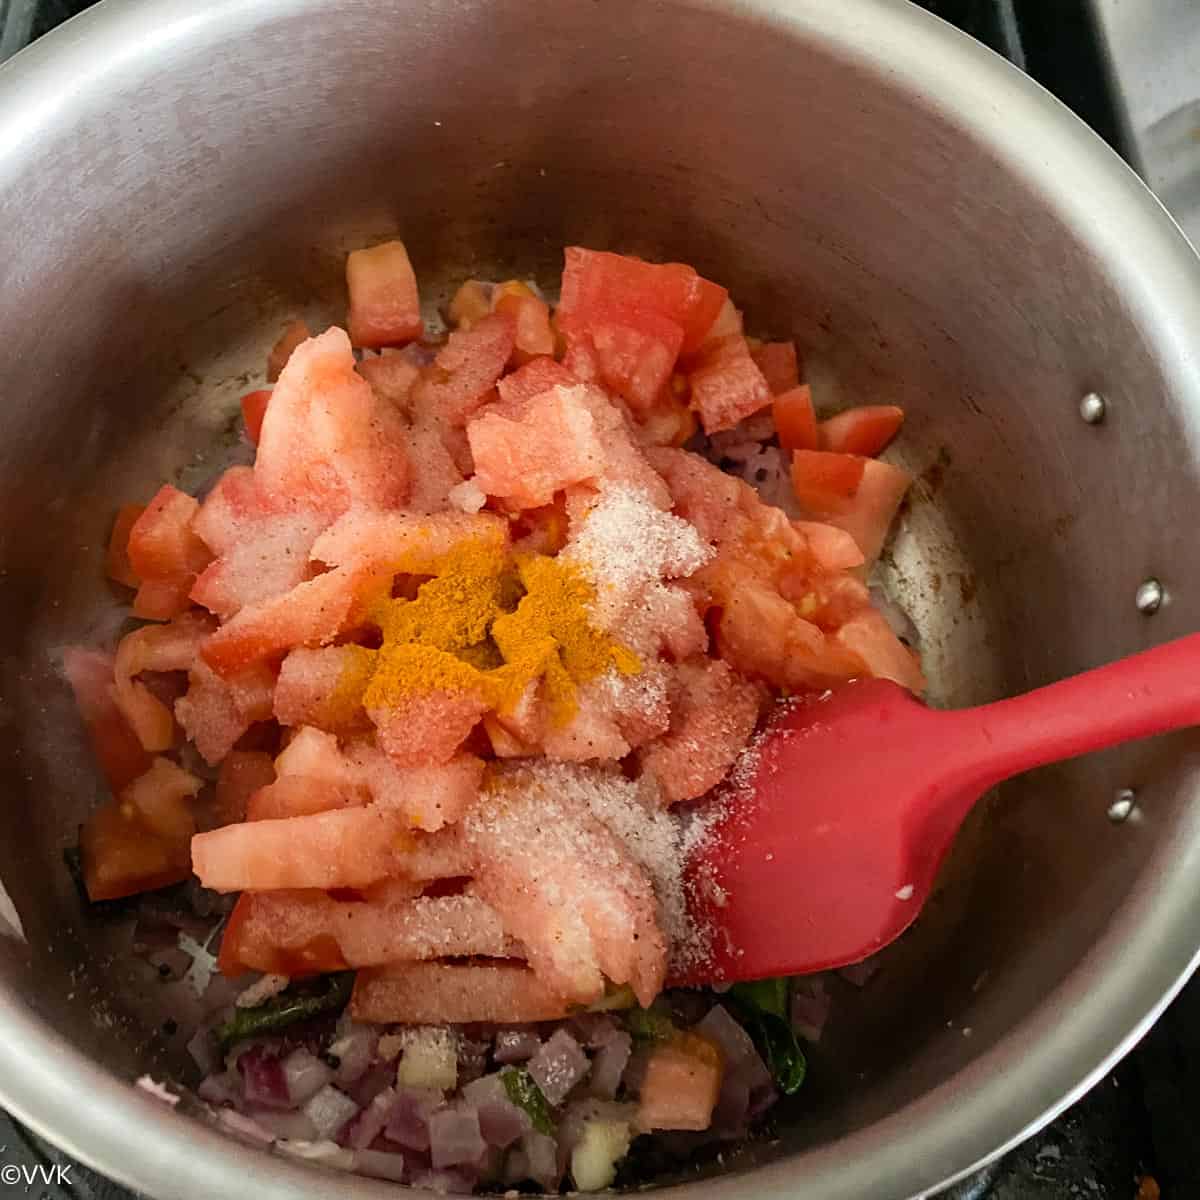 adding the chopped tomatoes and cooking